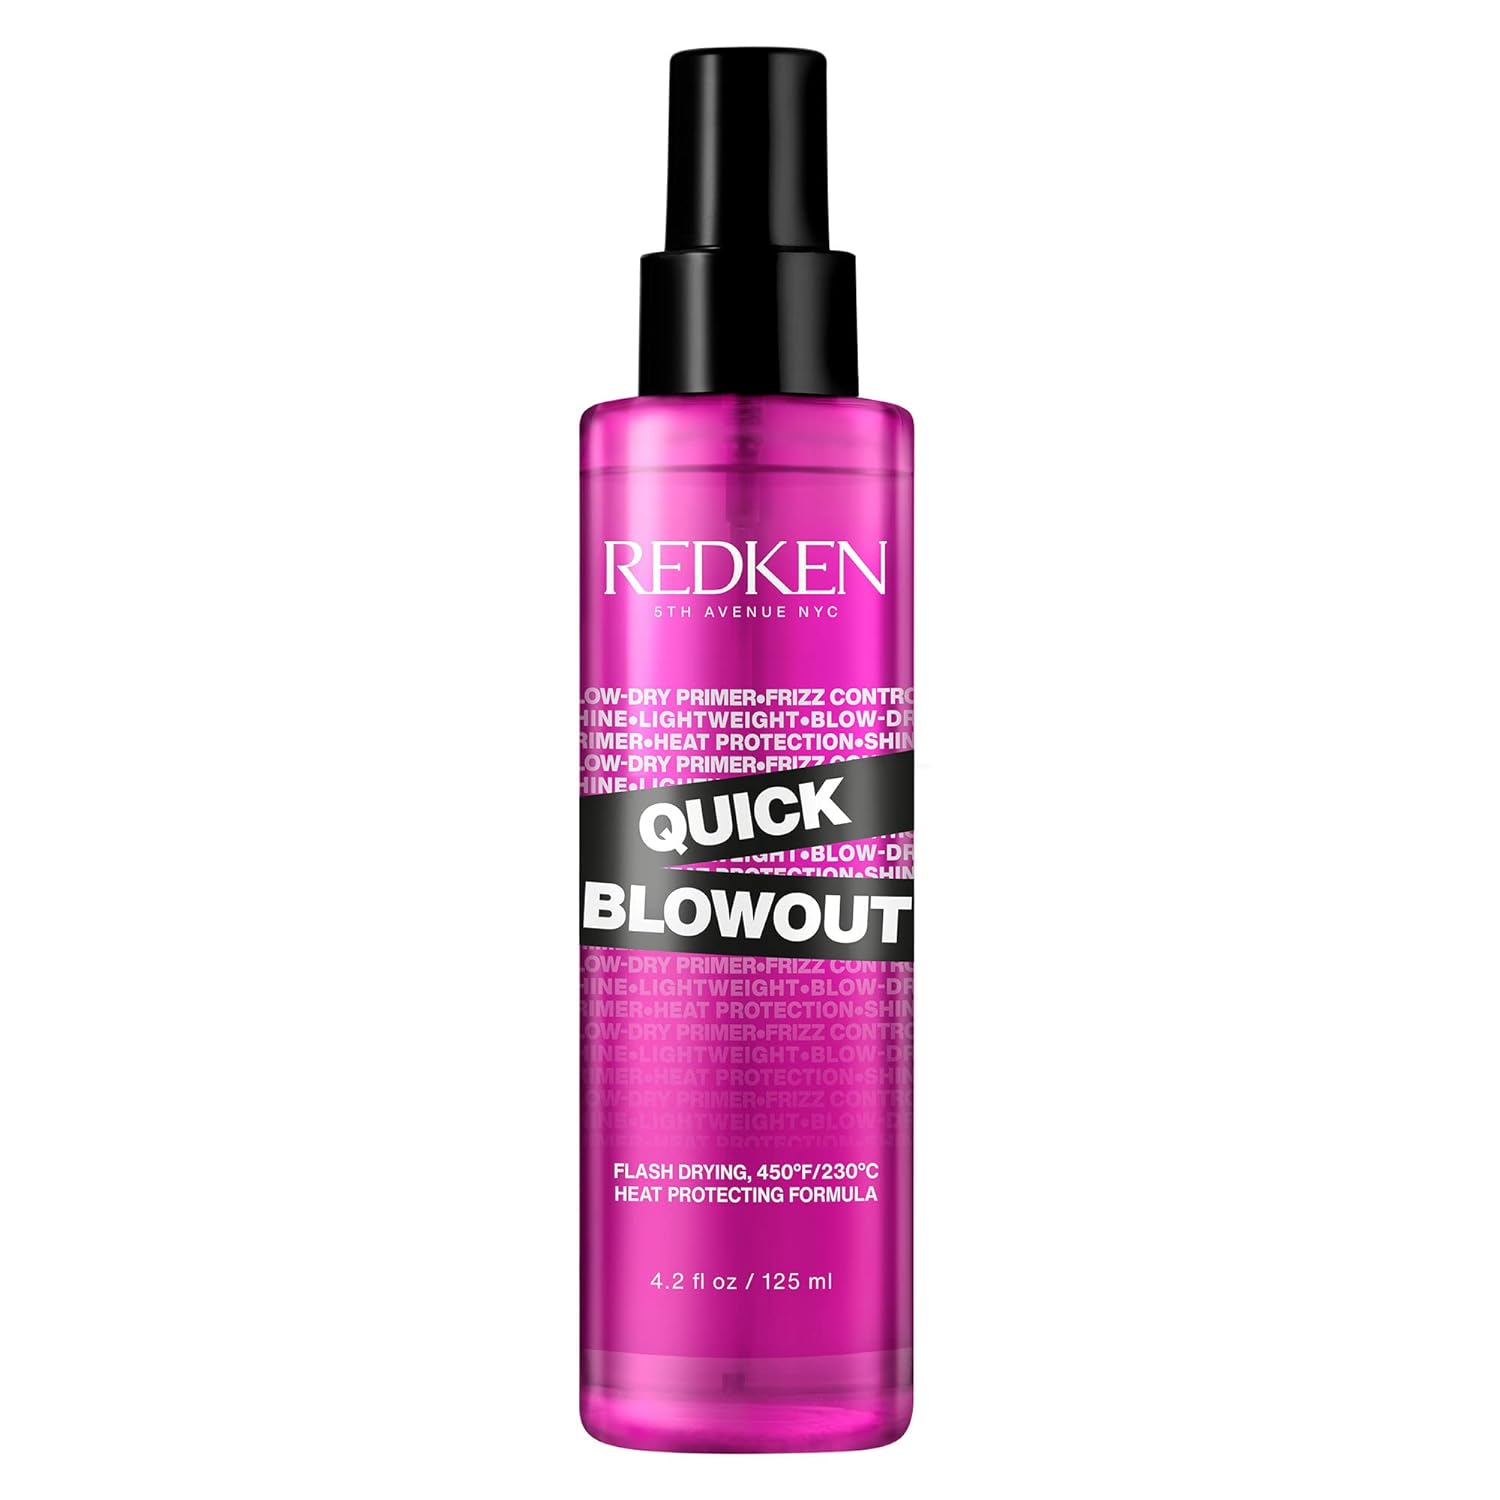 Redken Quick Blowout Heat Protection Spray | Blow Dry Primer to Reduce Styling Time | Smooths & Adds Shine | Lightweight Blowdry Heat Protectant Spray for Hair | For All Hair Types